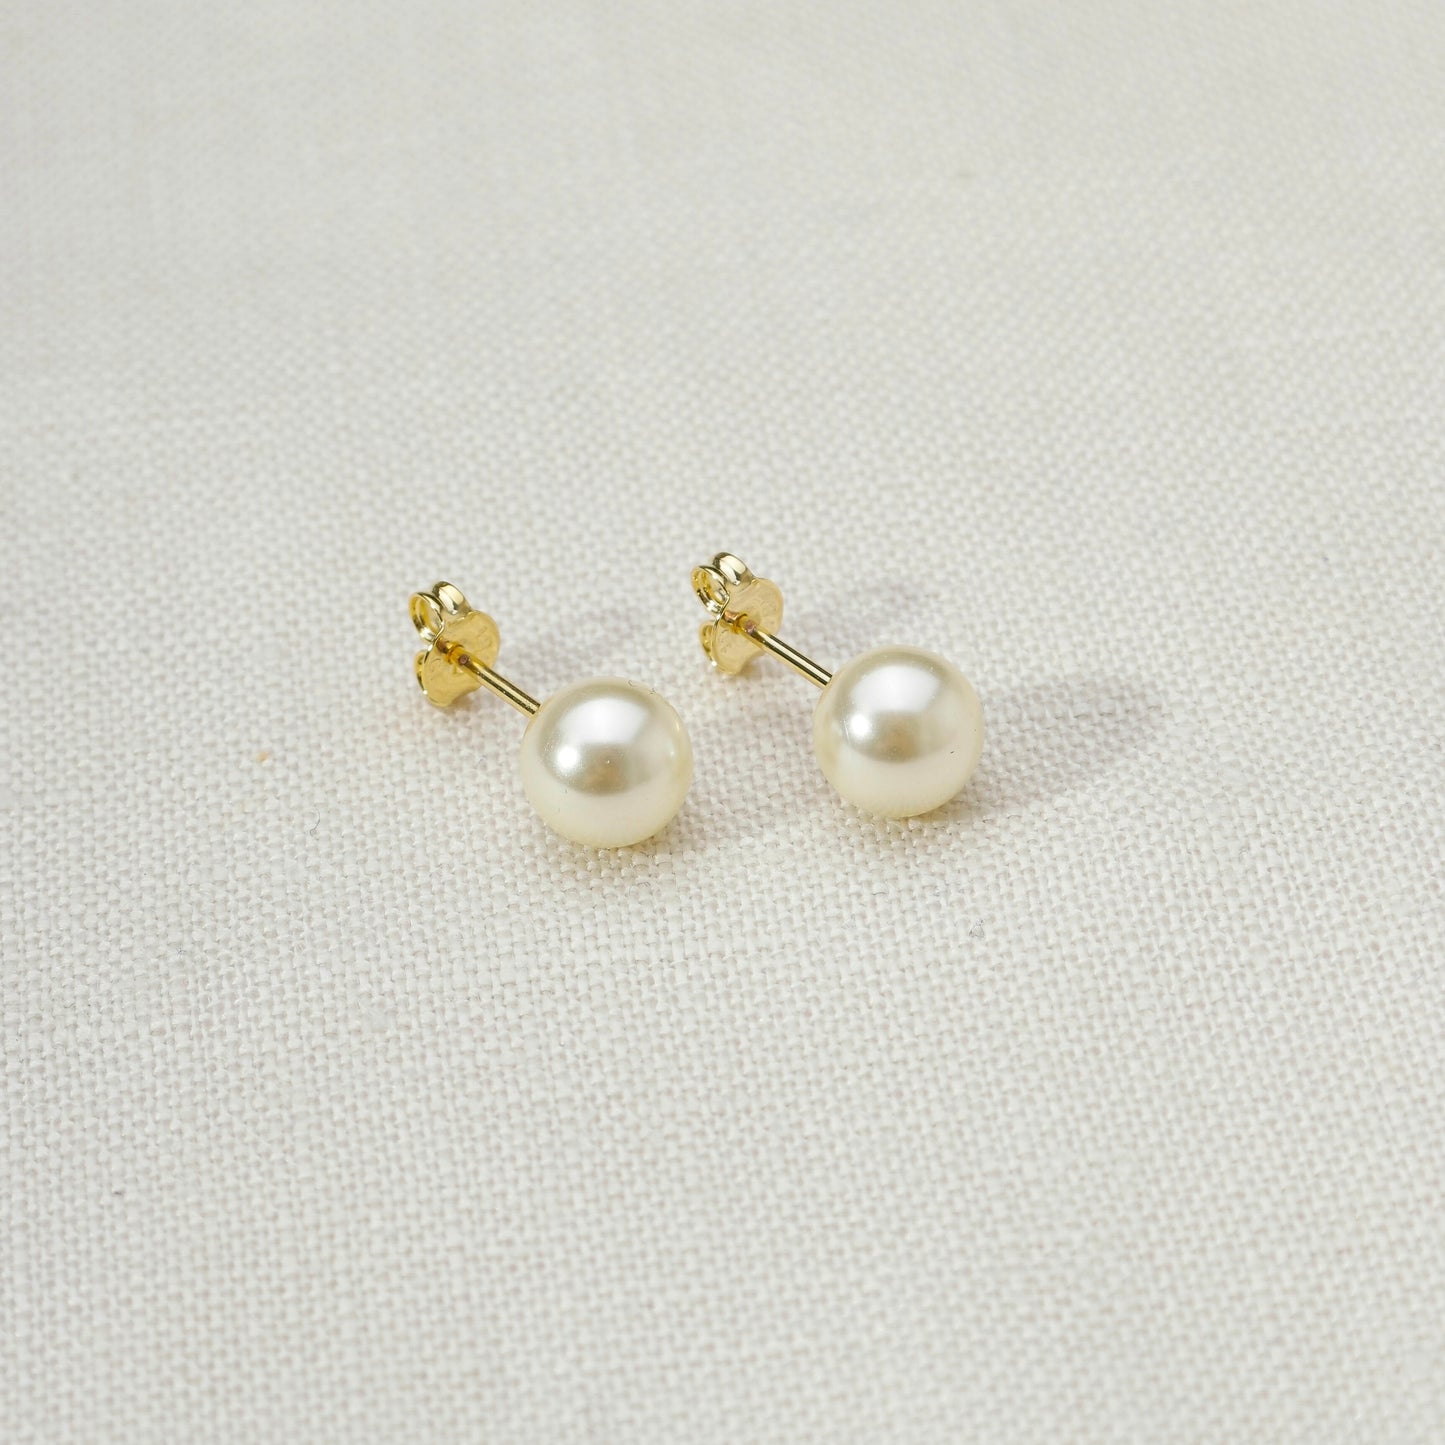 18k Gold Filled Simulated Pearl Stud